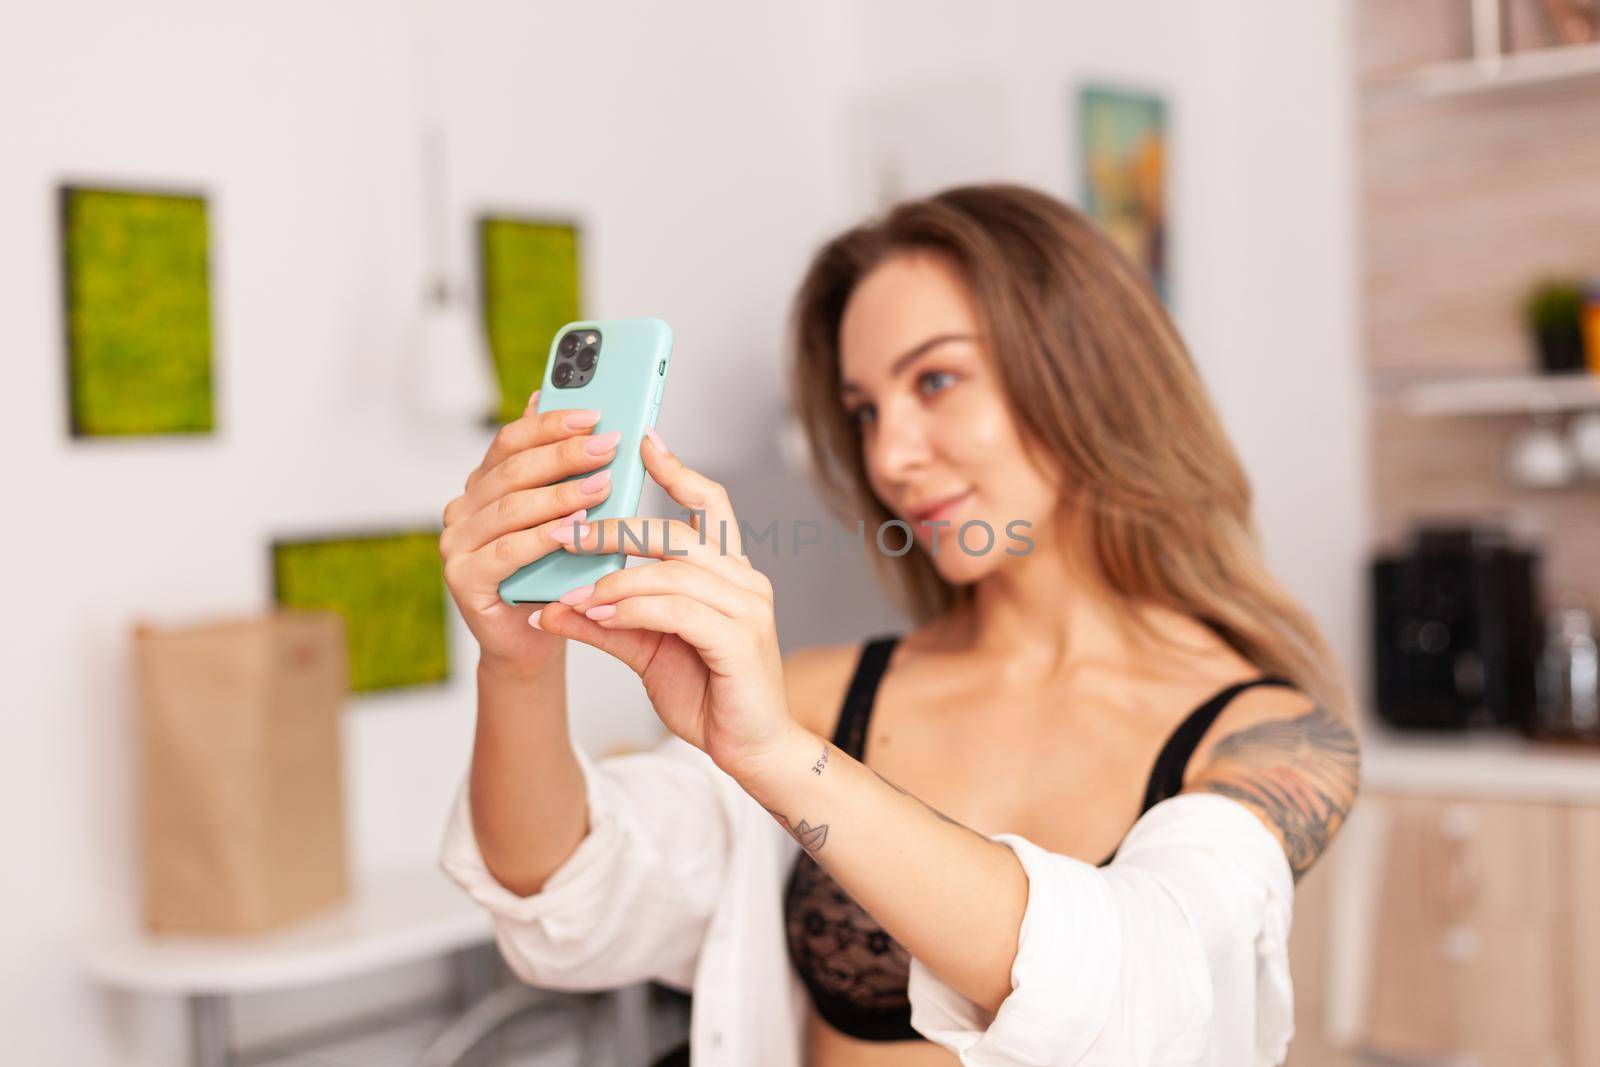 Portrait of beautiful woman looking at phone camera by DCStudio